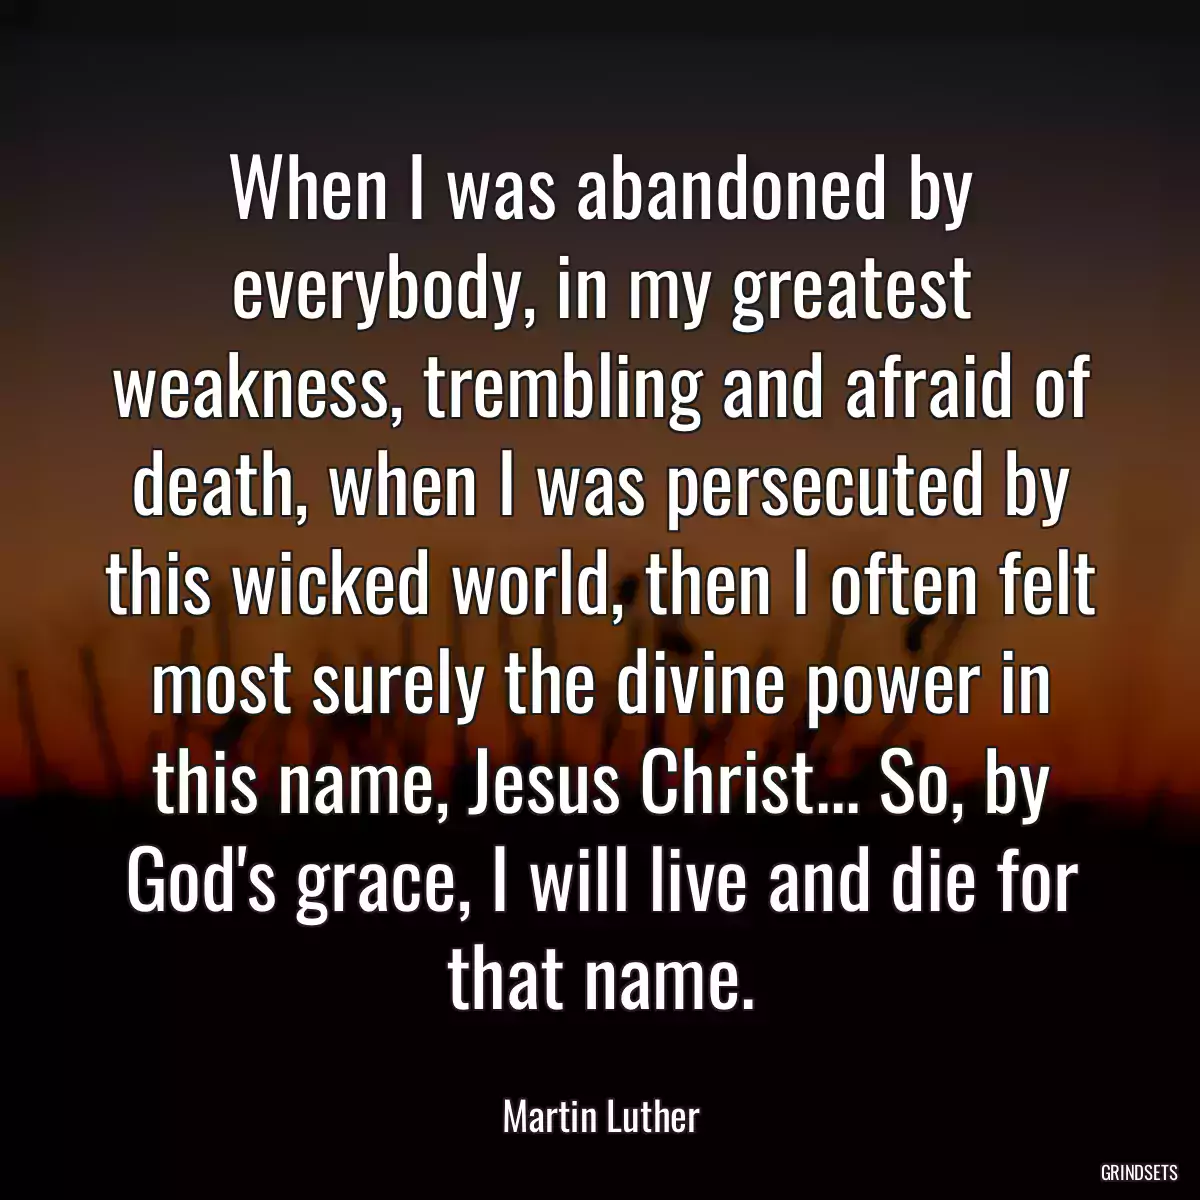 When I was abandoned by everybody, in my greatest weakness, trembling and afraid of death, when I was persecuted by this wicked world, then I often felt most surely the divine power in this name, Jesus Christ... So, by God\'s grace, I will live and die for that name.